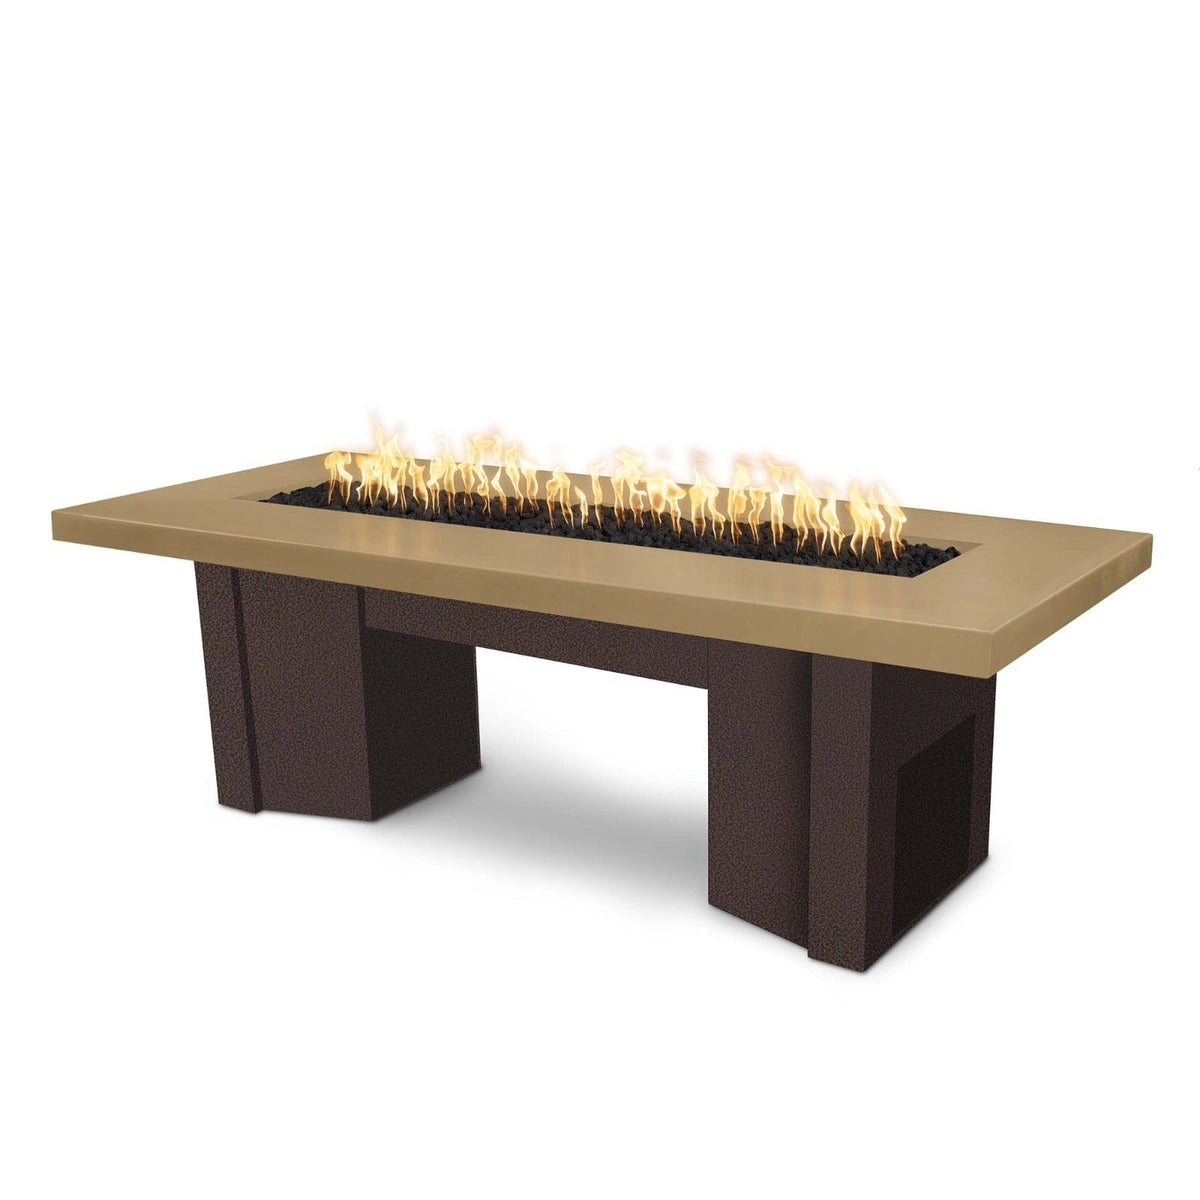 The Outdoor Plus Fire Features Brown (-BRN) / Copper Vein Powder Coated Steel (-CPV) The Outdoor Plus 78&quot; Alameda Fire Table Smooth Concrete in Natural Gas - Match Lit with Flame Sense System / OPT-ALMGFRC78FSML-NG